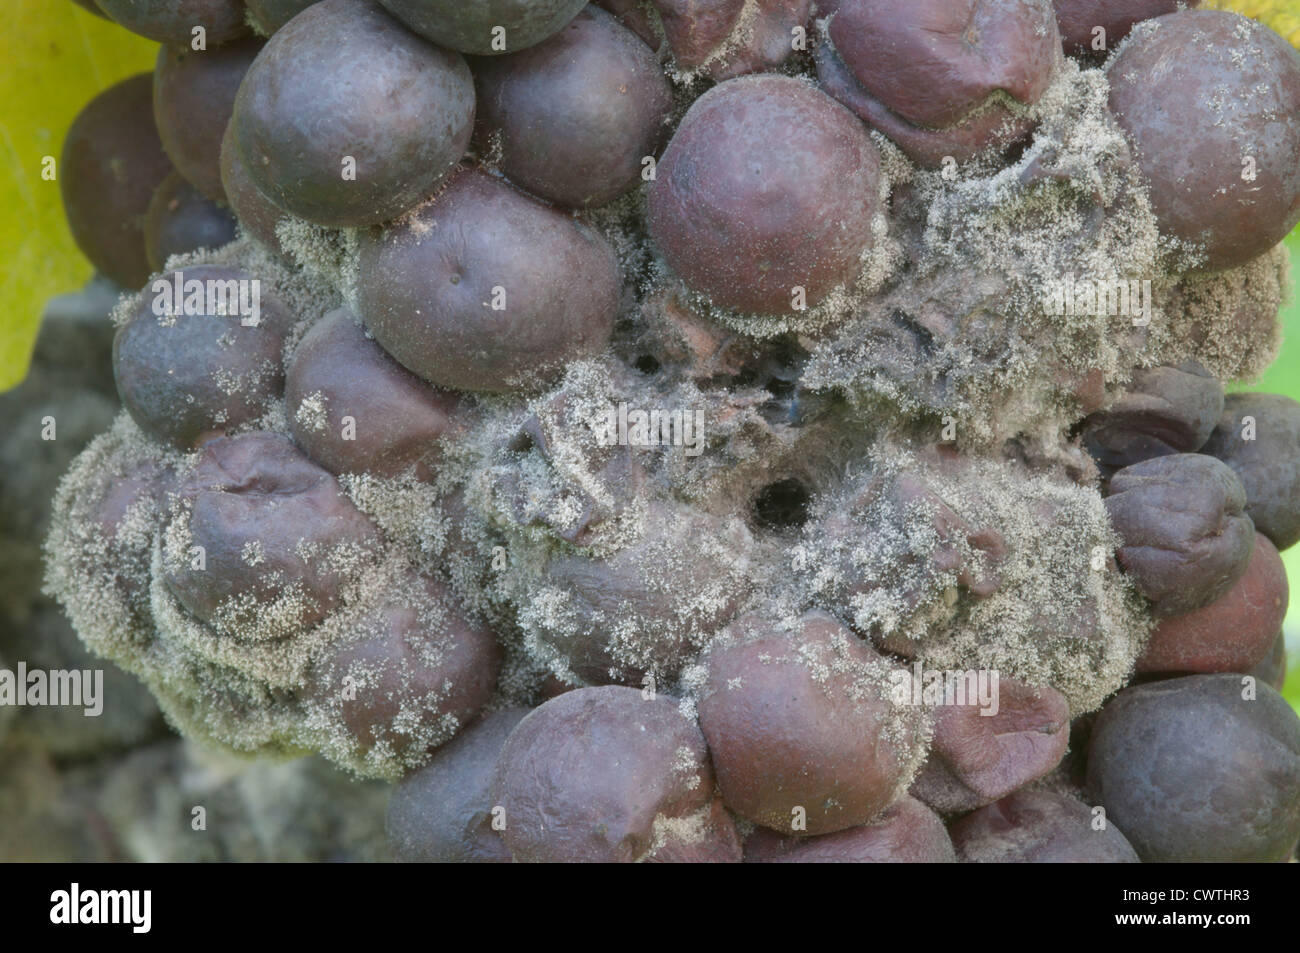 grapes botrytis (Botrytis cinerea) on grapes after wet autumn West Sussex, UK. October Stock Photo